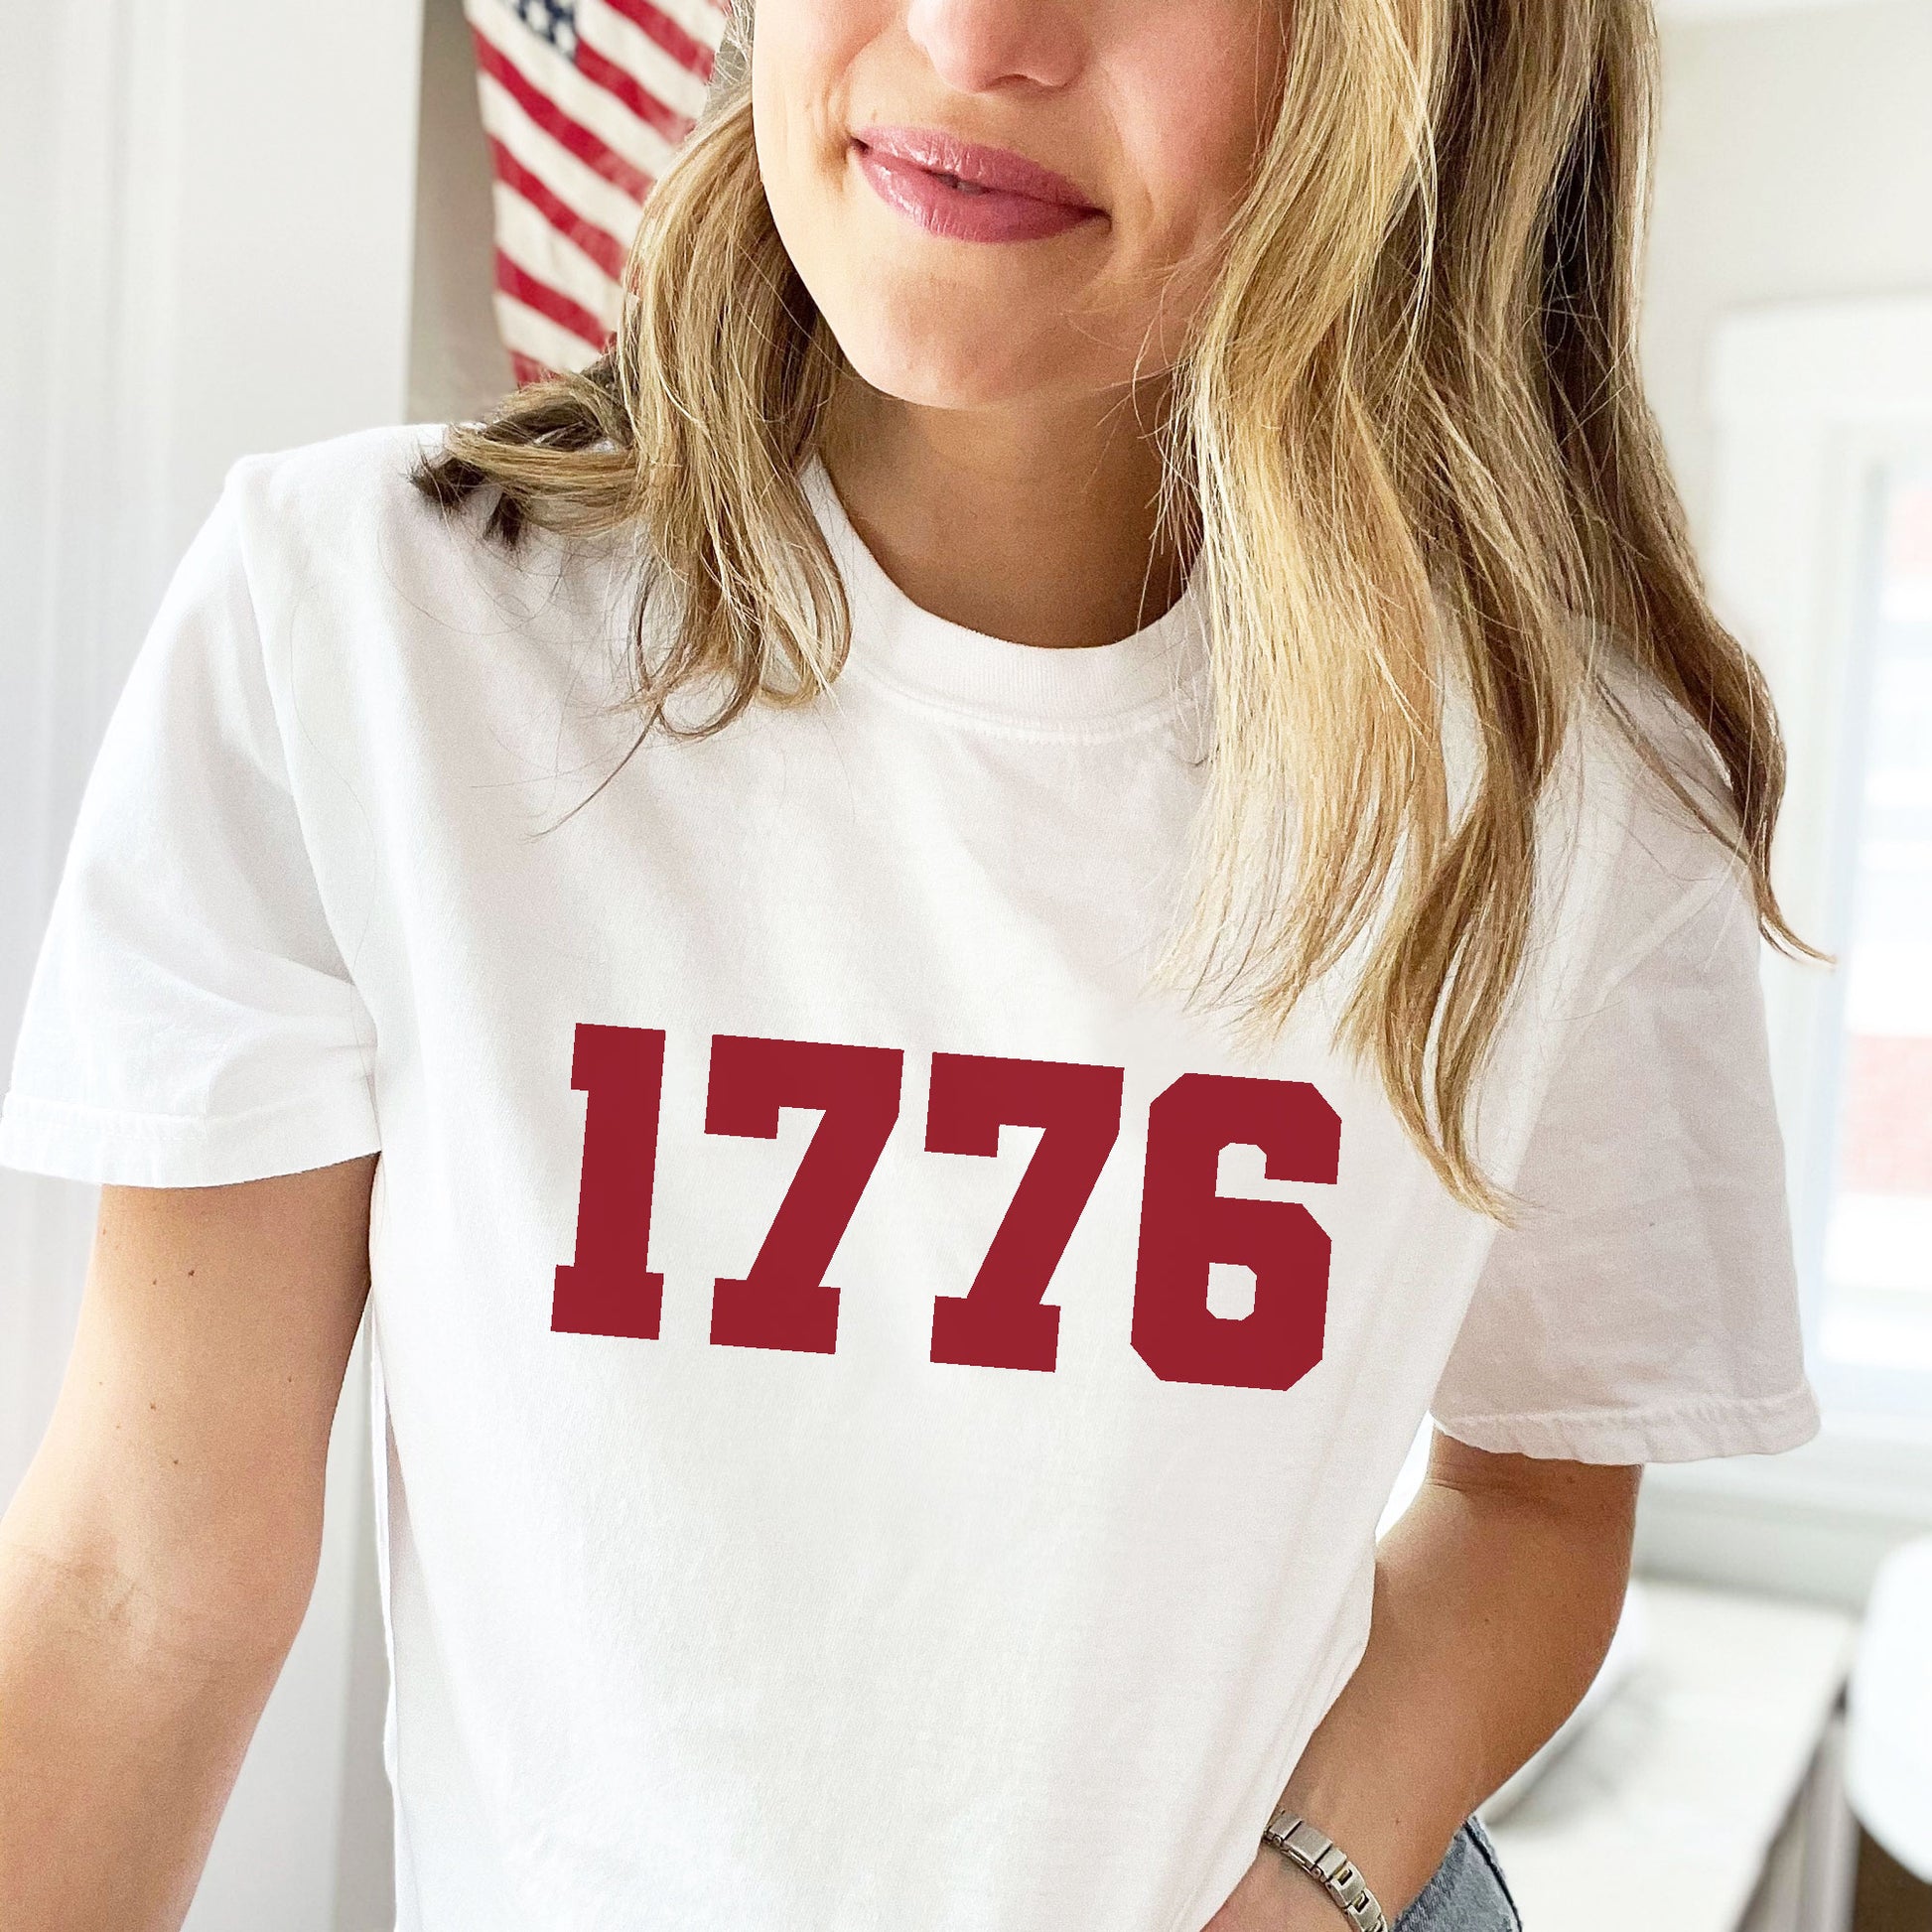 woman wearing a white tee with a 1776 print